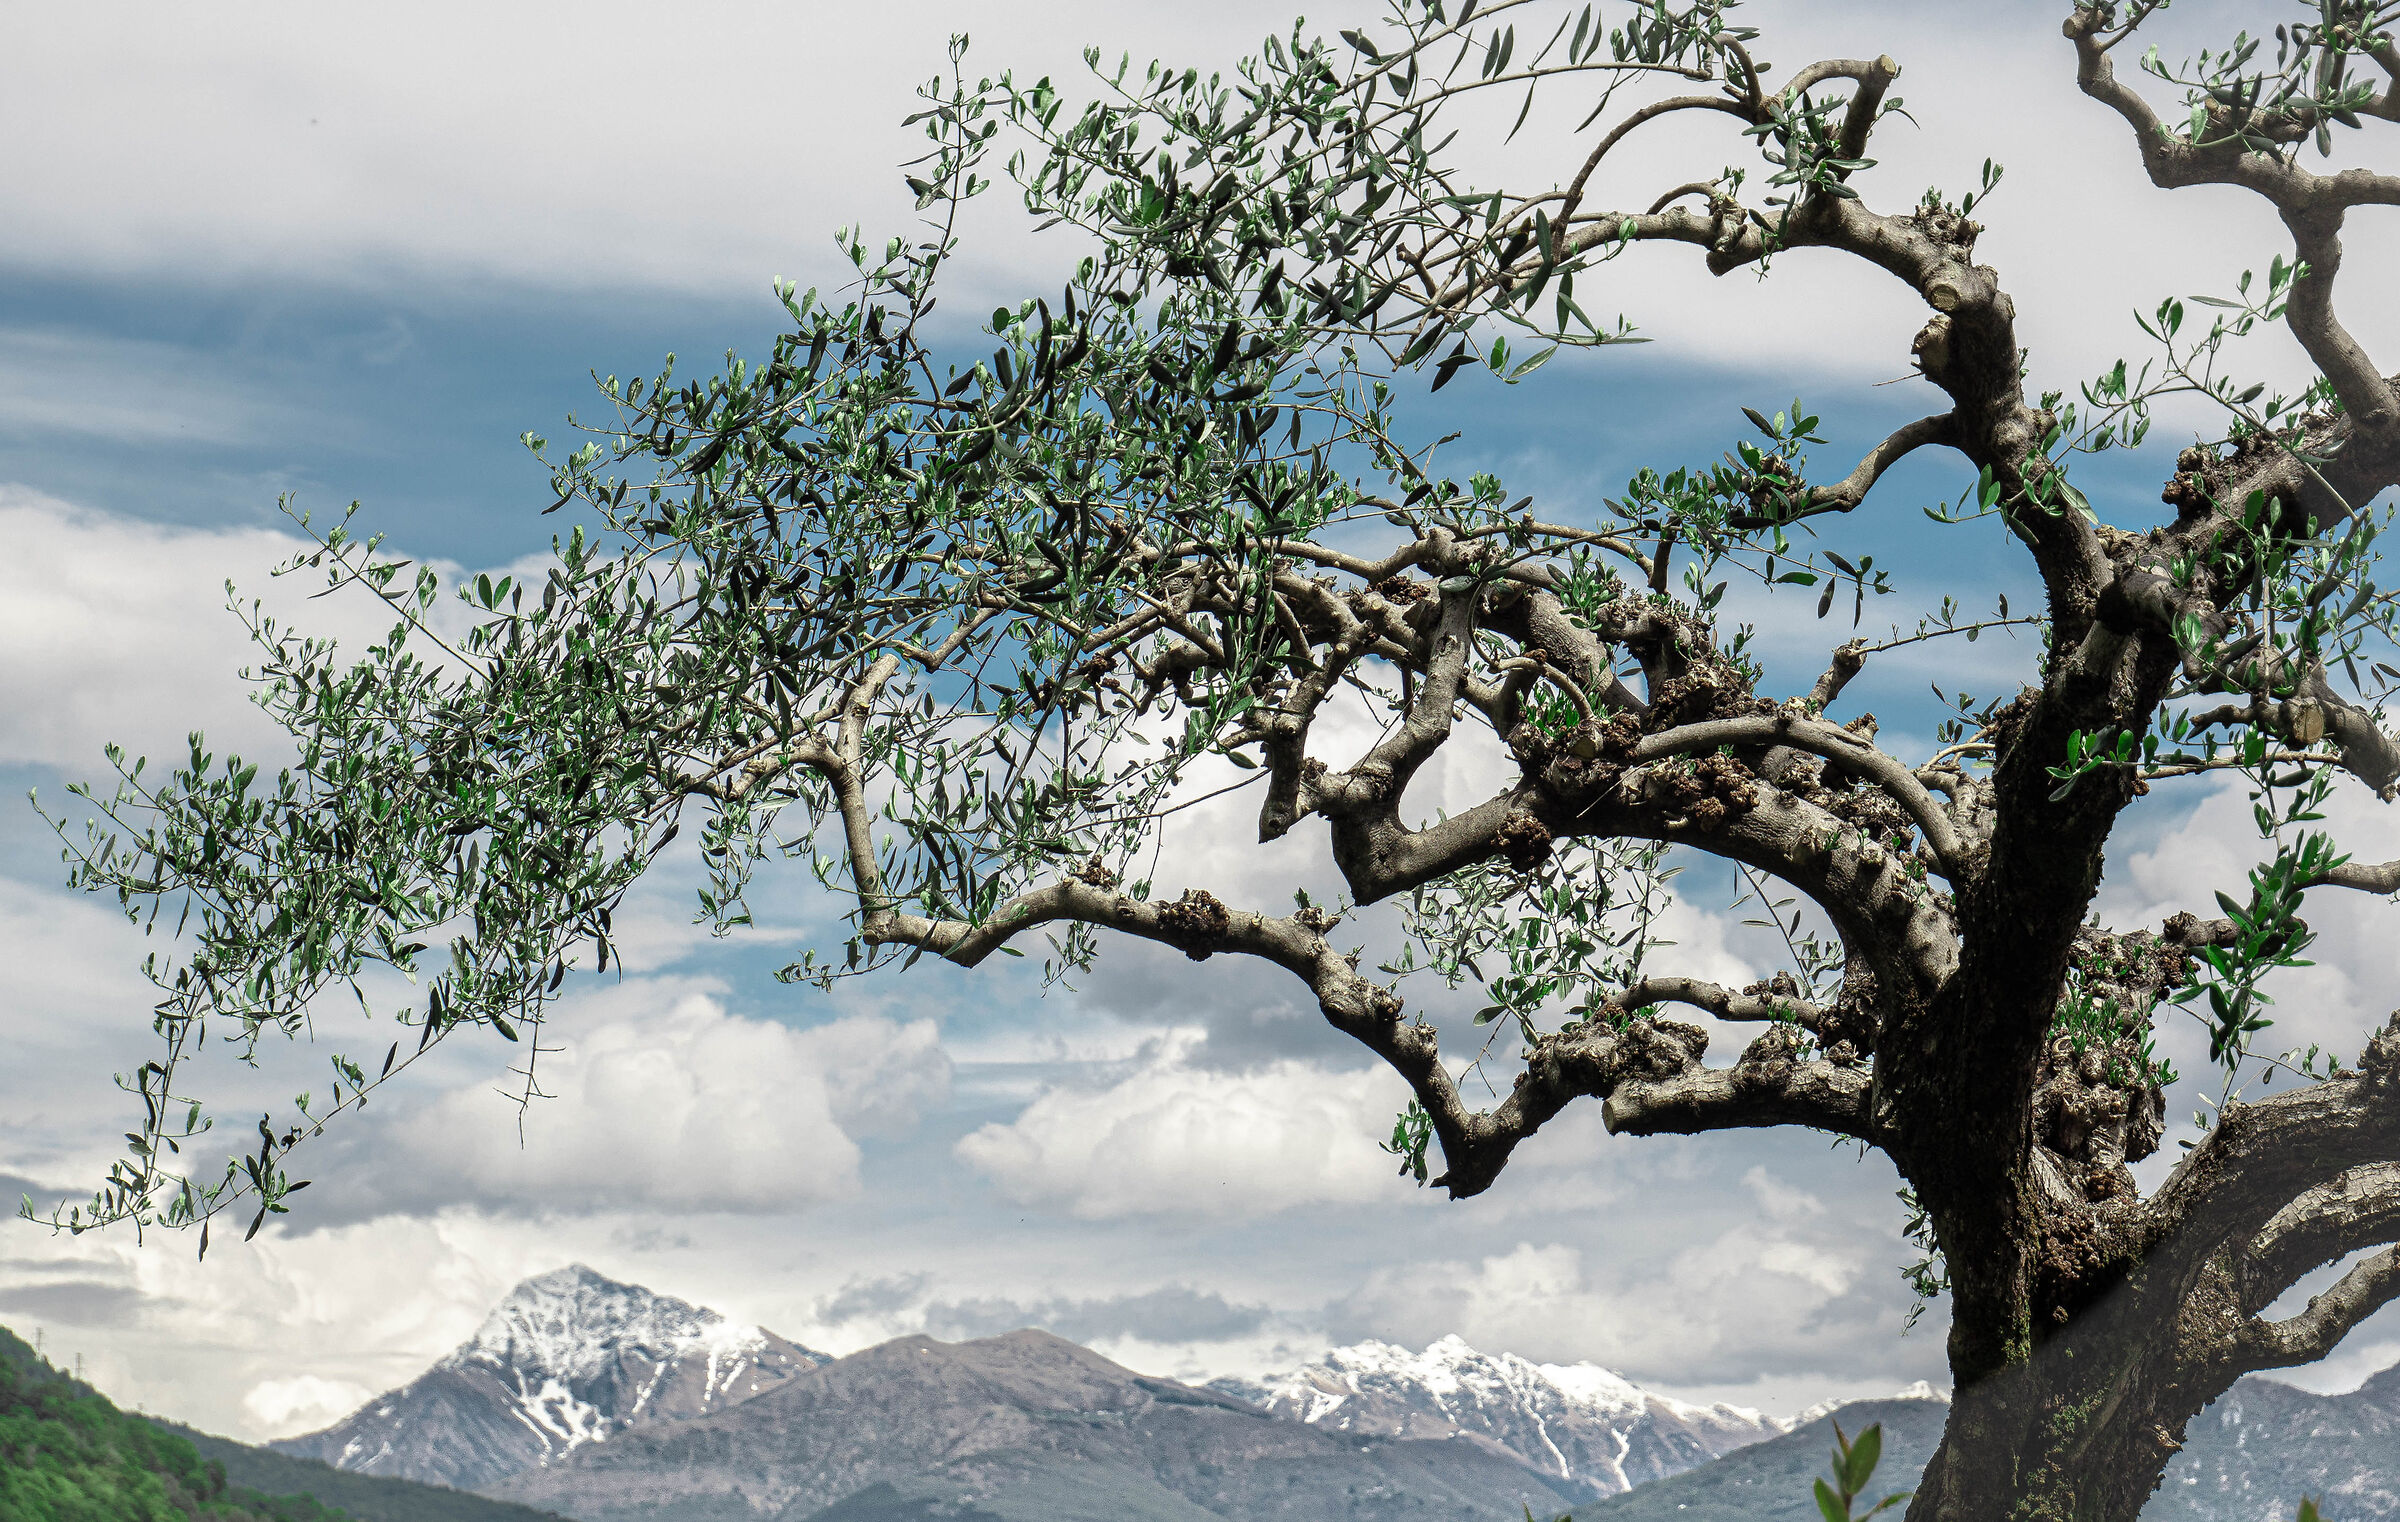 The mountain olive tree...